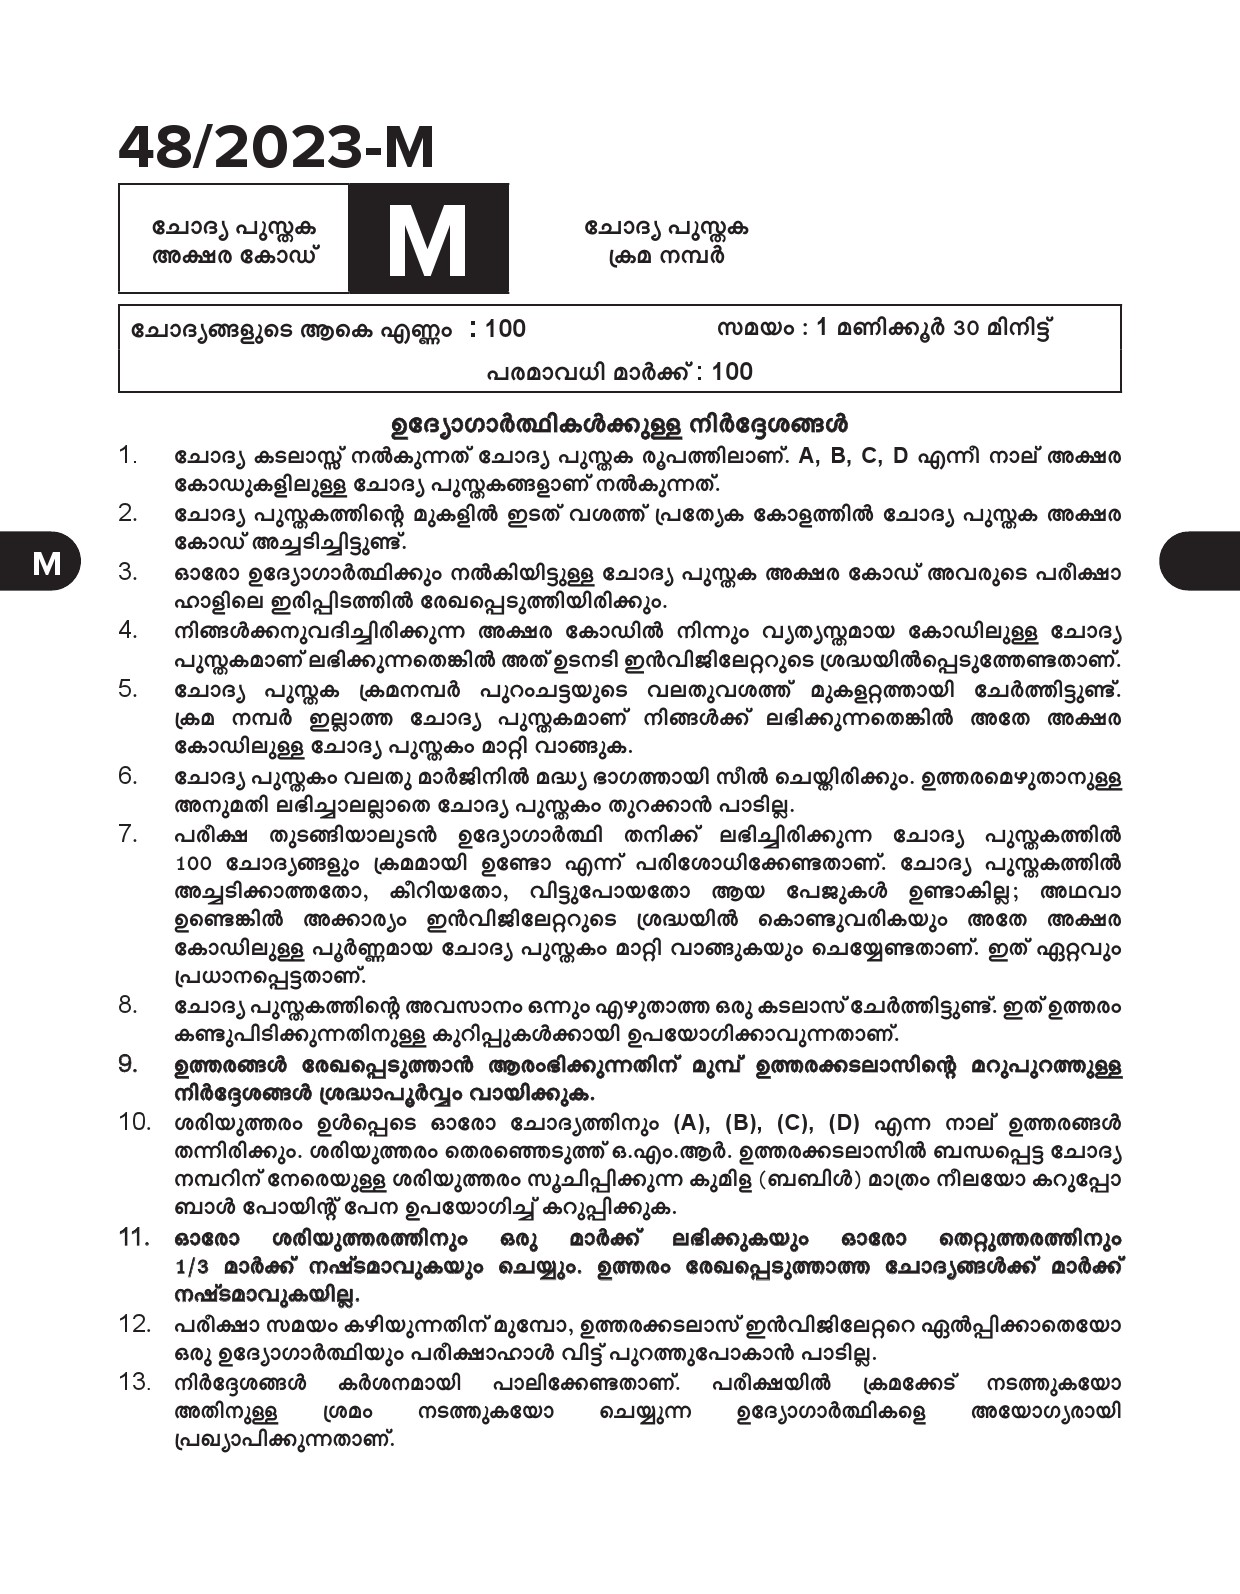 KPSC Fire and Rescue Officer Malayalam Exam 2023 Code 0482023 M 1